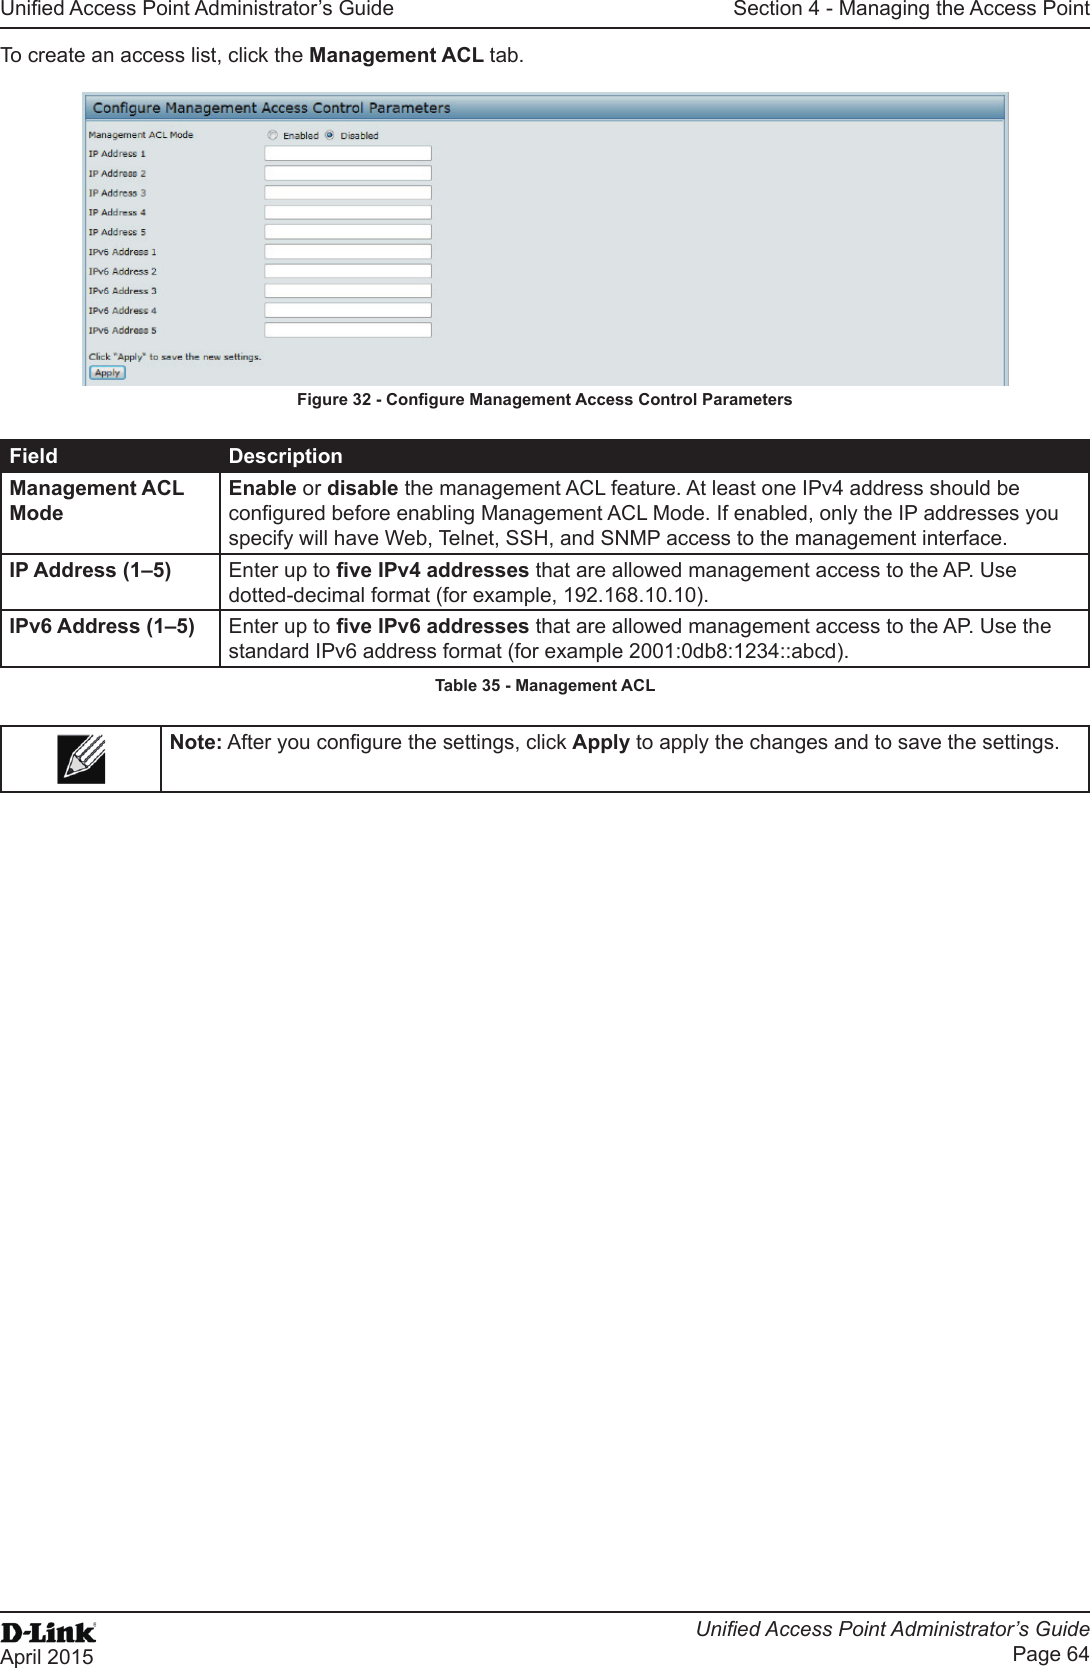 Unied Access Point Administrator’s GuideUnied Access Point Administrator’s GuidePage 64April 2015Section 4 - Managing the Access PointTo create an access list, click the Management ACL tab.Figure 32 - Congure Management Access Control ParametersField DescriptionManagement ACL ModeEnable or disable the management ACL feature. At least one IPv4 address should be congured before enabling Management ACL Mode. If enabled, only the IP addresses you specify will have Web, Telnet, SSH, and SNMP access to the management interface.IP Address (1–5) Enter up to ve IPv4 addresses that are allowed management access to the AP. Use dotted-decimal format (for example, 192.168.10.10).IPv6 Address (1–5) Enter up to ve IPv6 addresses that are allowed management access to the AP. Use the standard IPv6 address format (for example 2001:0db8:1234::abcd).Table 35 - Management ACLNote: After you congure the settings, click Apply to apply the changes and to save the settings.